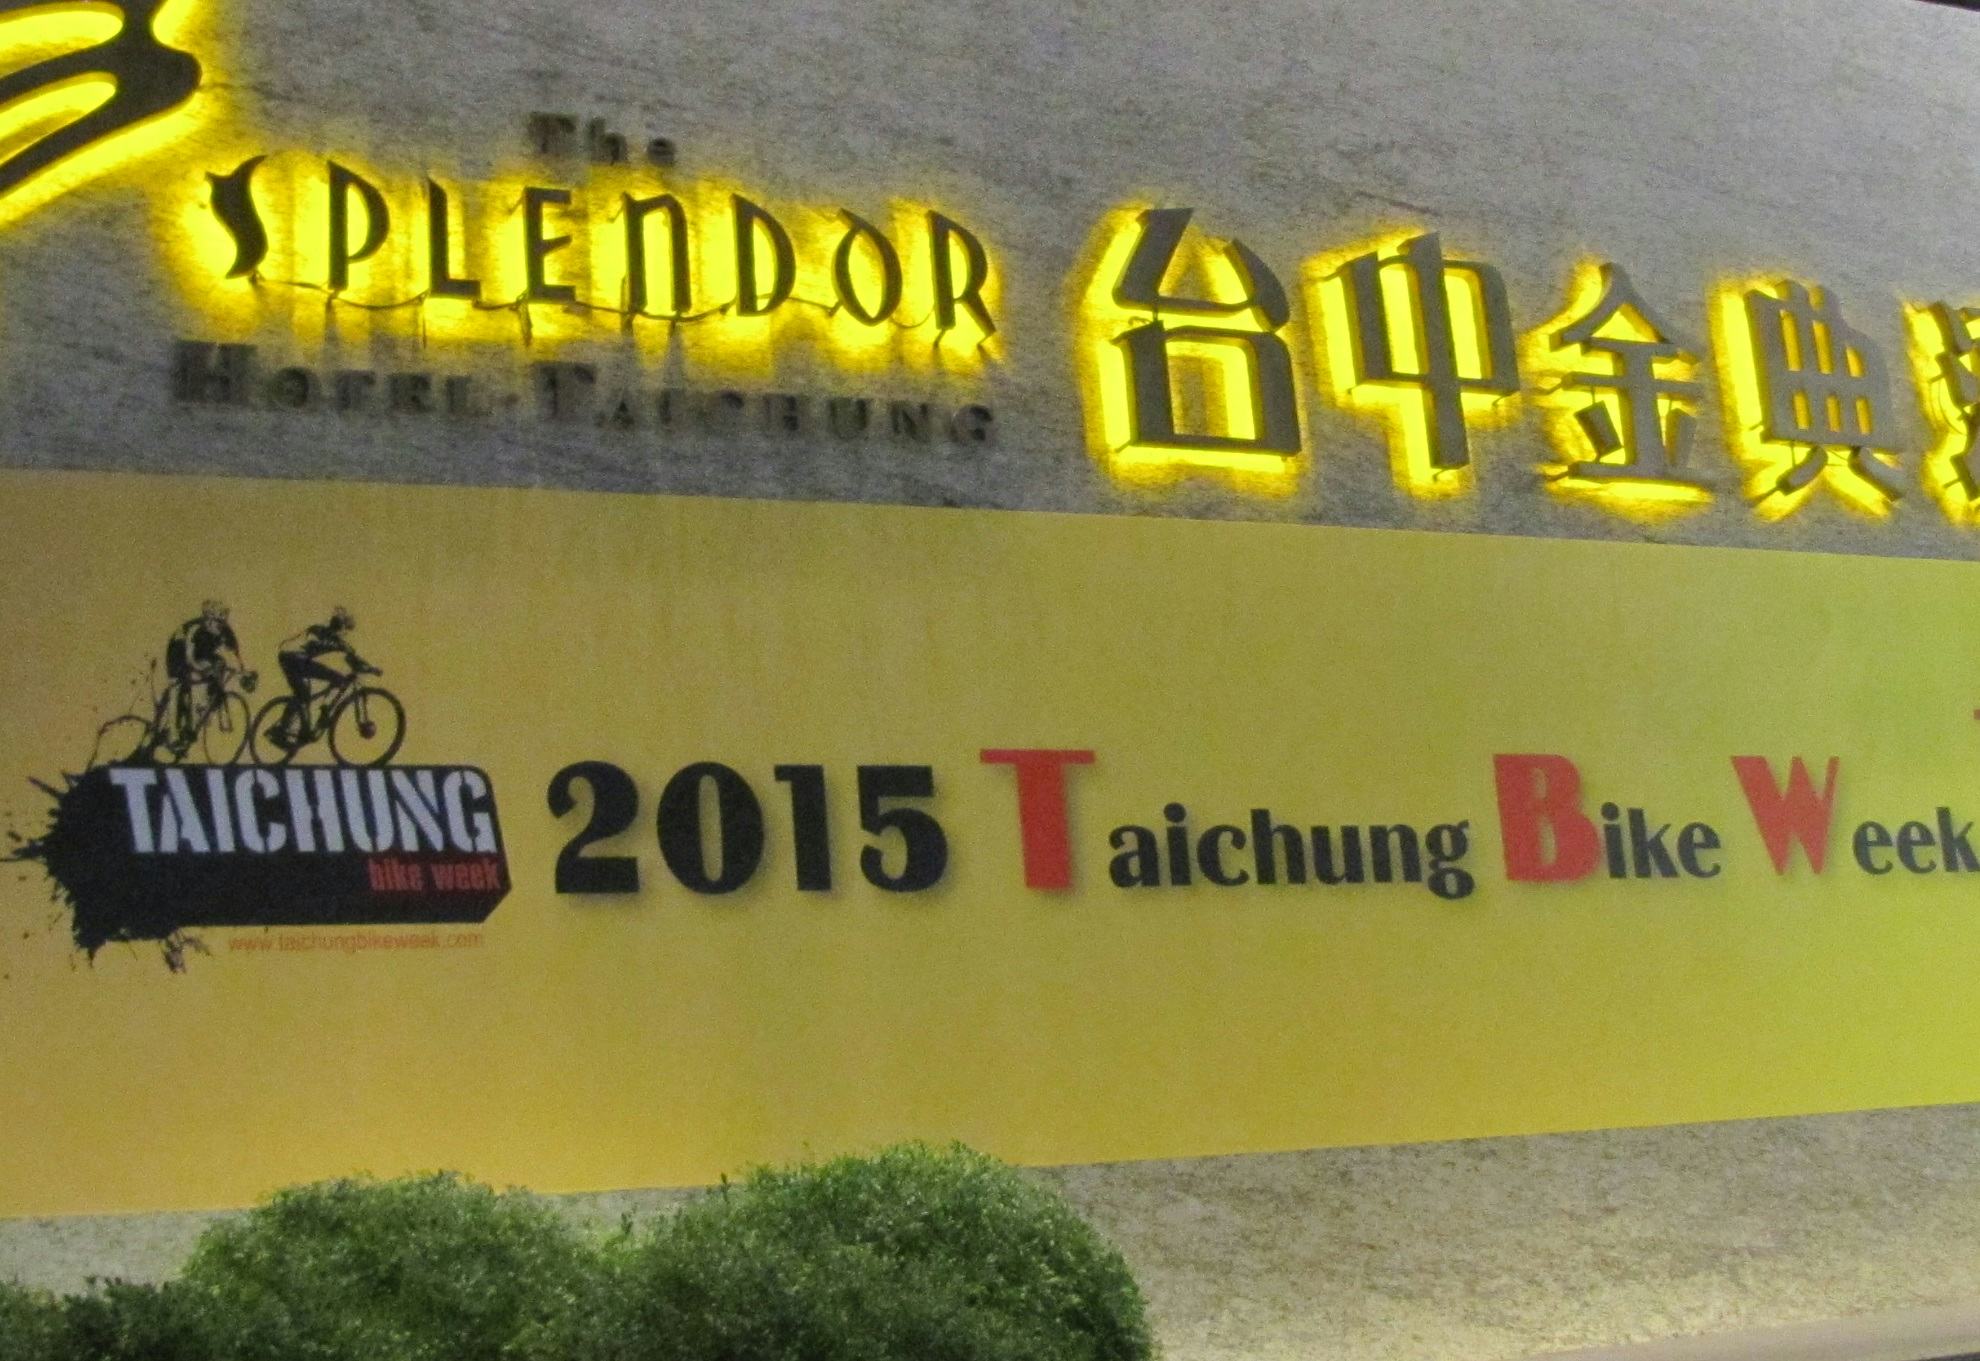 To create more exhibitors space the Lin hotel was added to the list for the Taichung Bike Week. – Photo Bike Europe